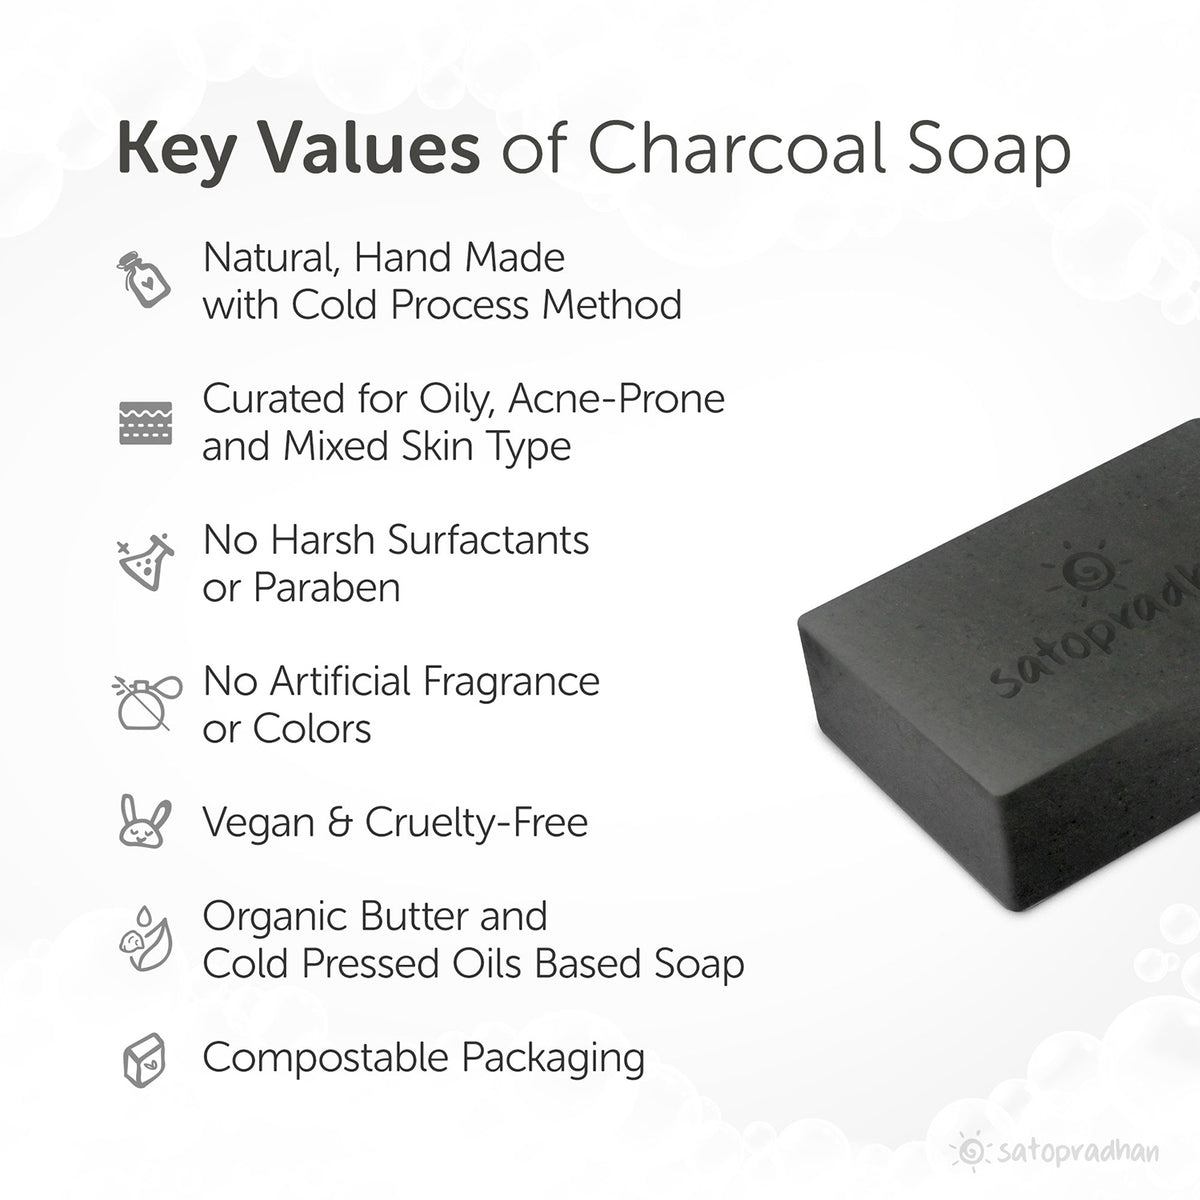 Activated Charcoal Multani Mitti Soap is made from chemica-free formulation and especially curated for oily, acne-prone skins